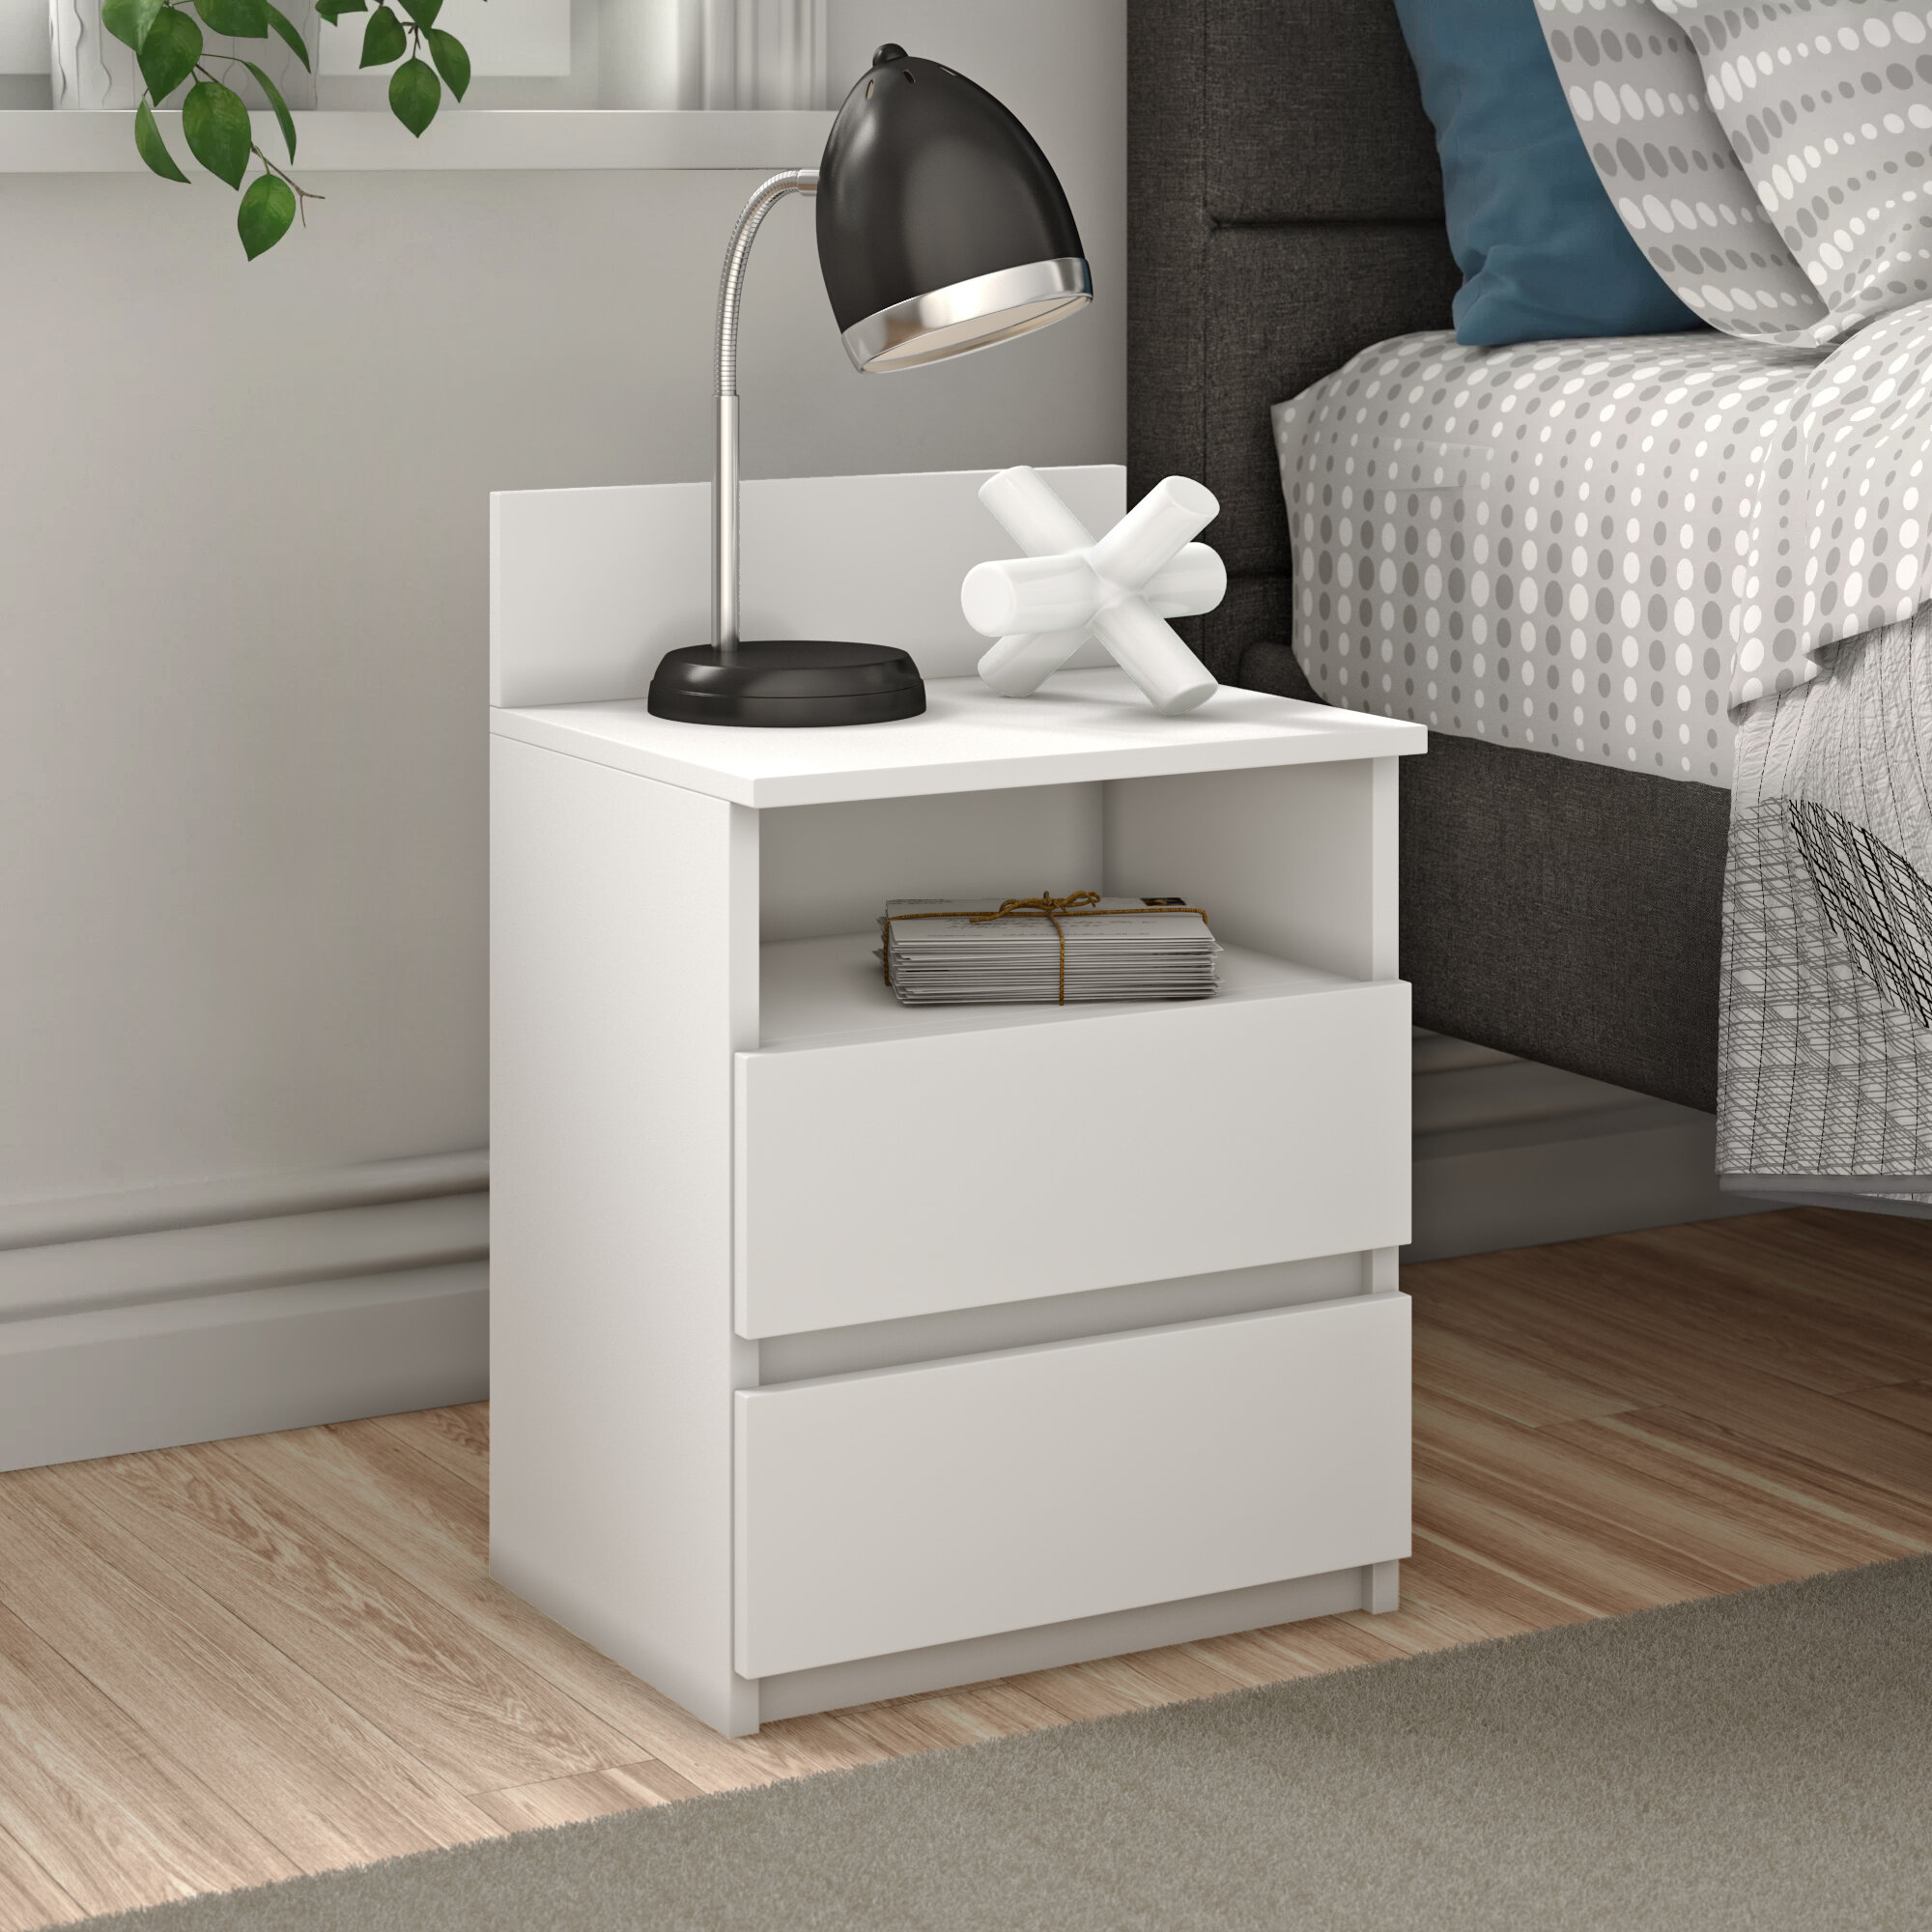 Germanica™ BAVARI Set of 2 Bedside 2-Drawer Cabinets in WHITE Colour With Chrome Detailing